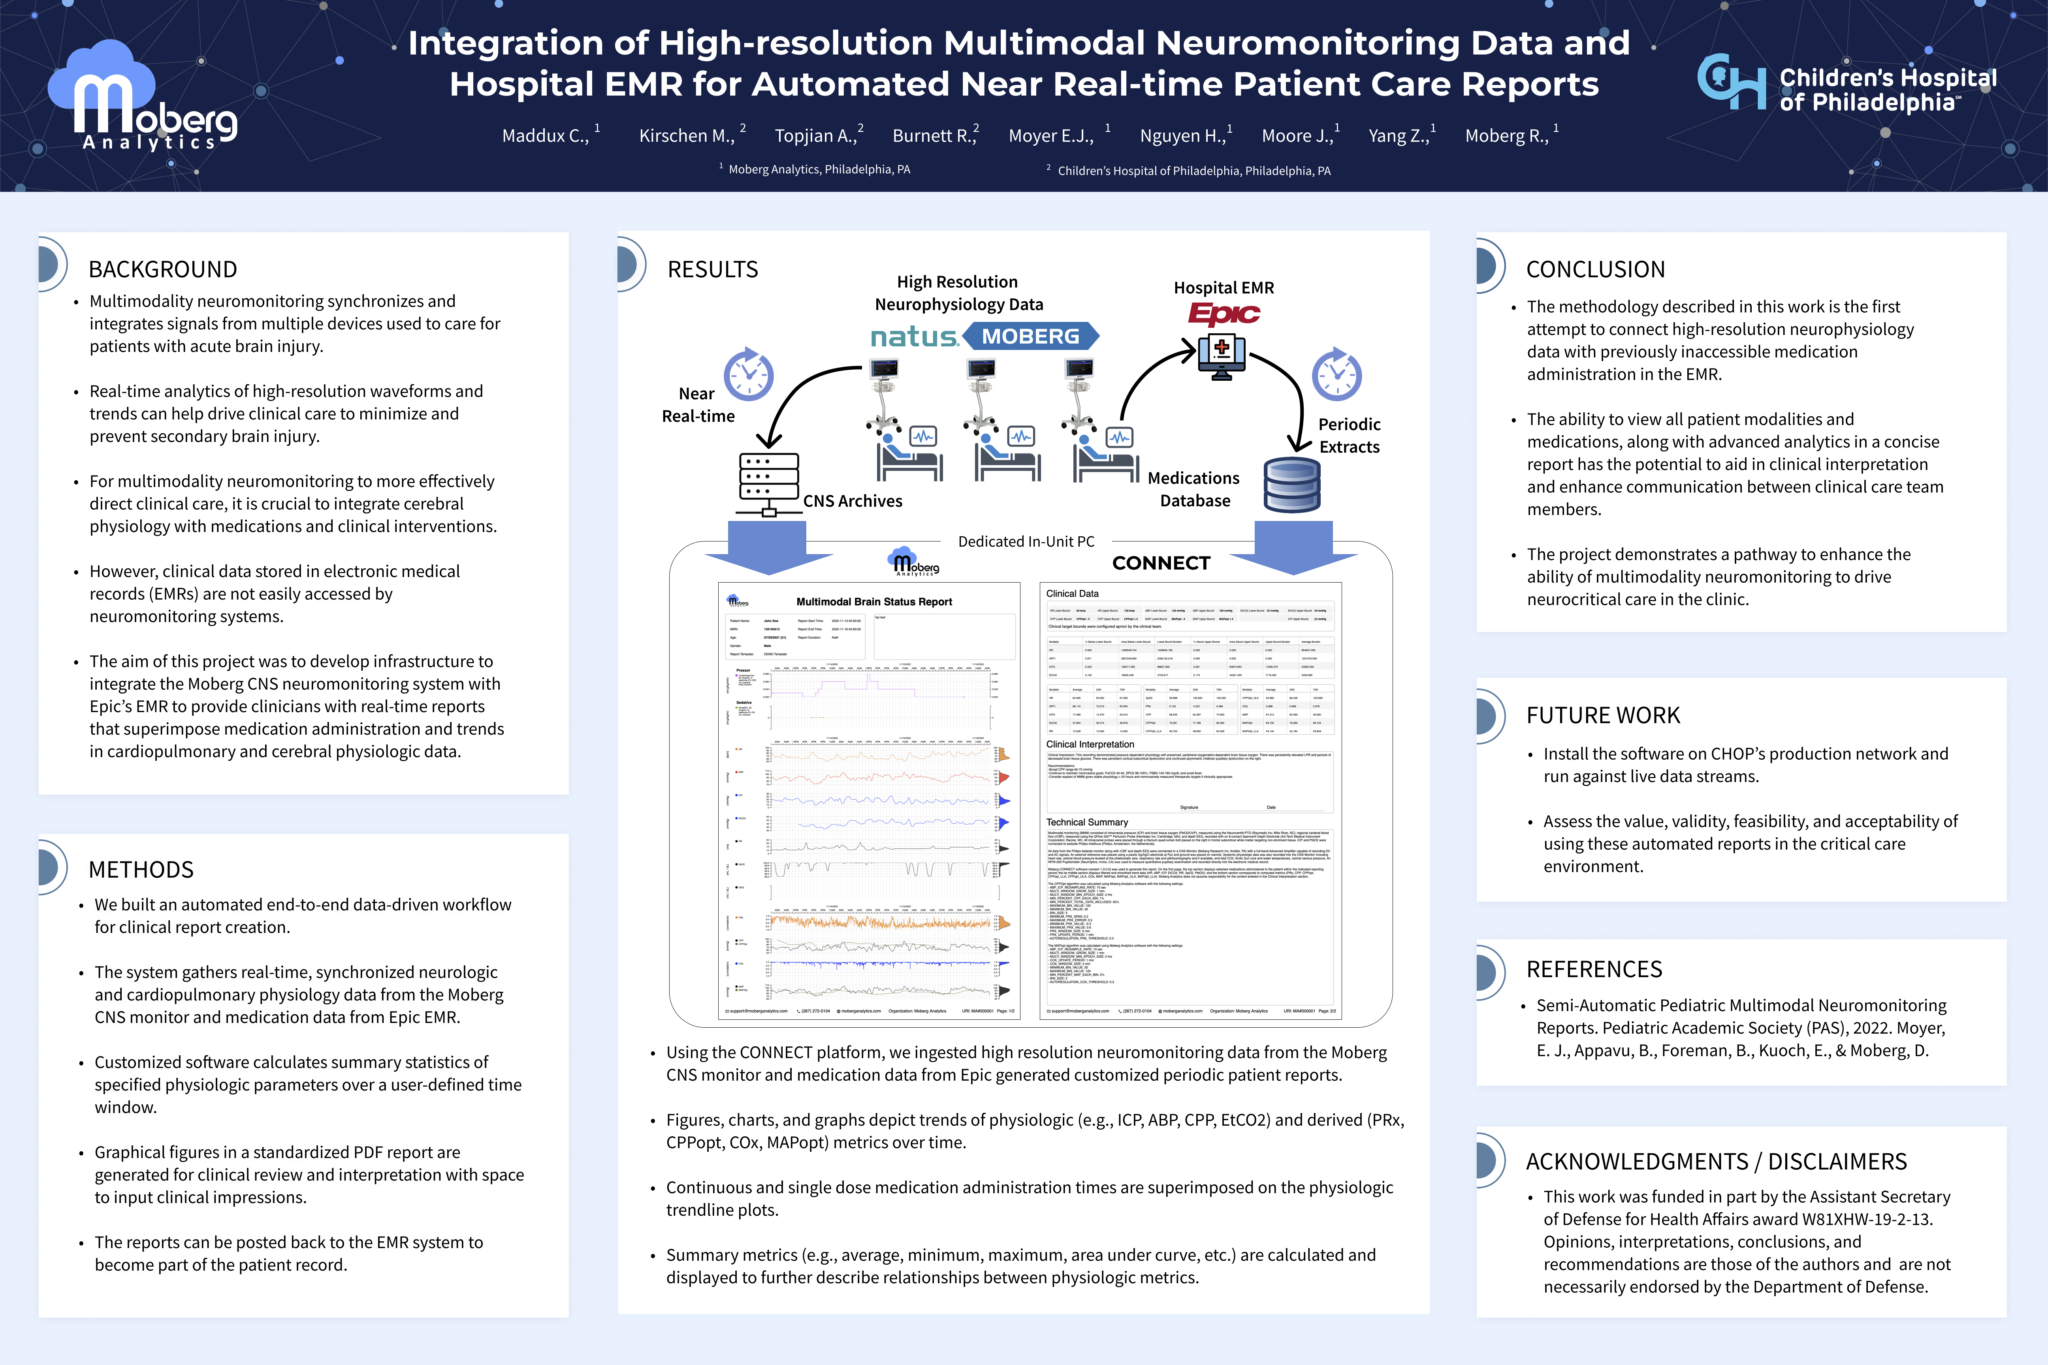 Integration of High-Resolution Multimodal Neuromonitoring Data and Hospital EMR for Automated Near Real-Time Patient Care Reports